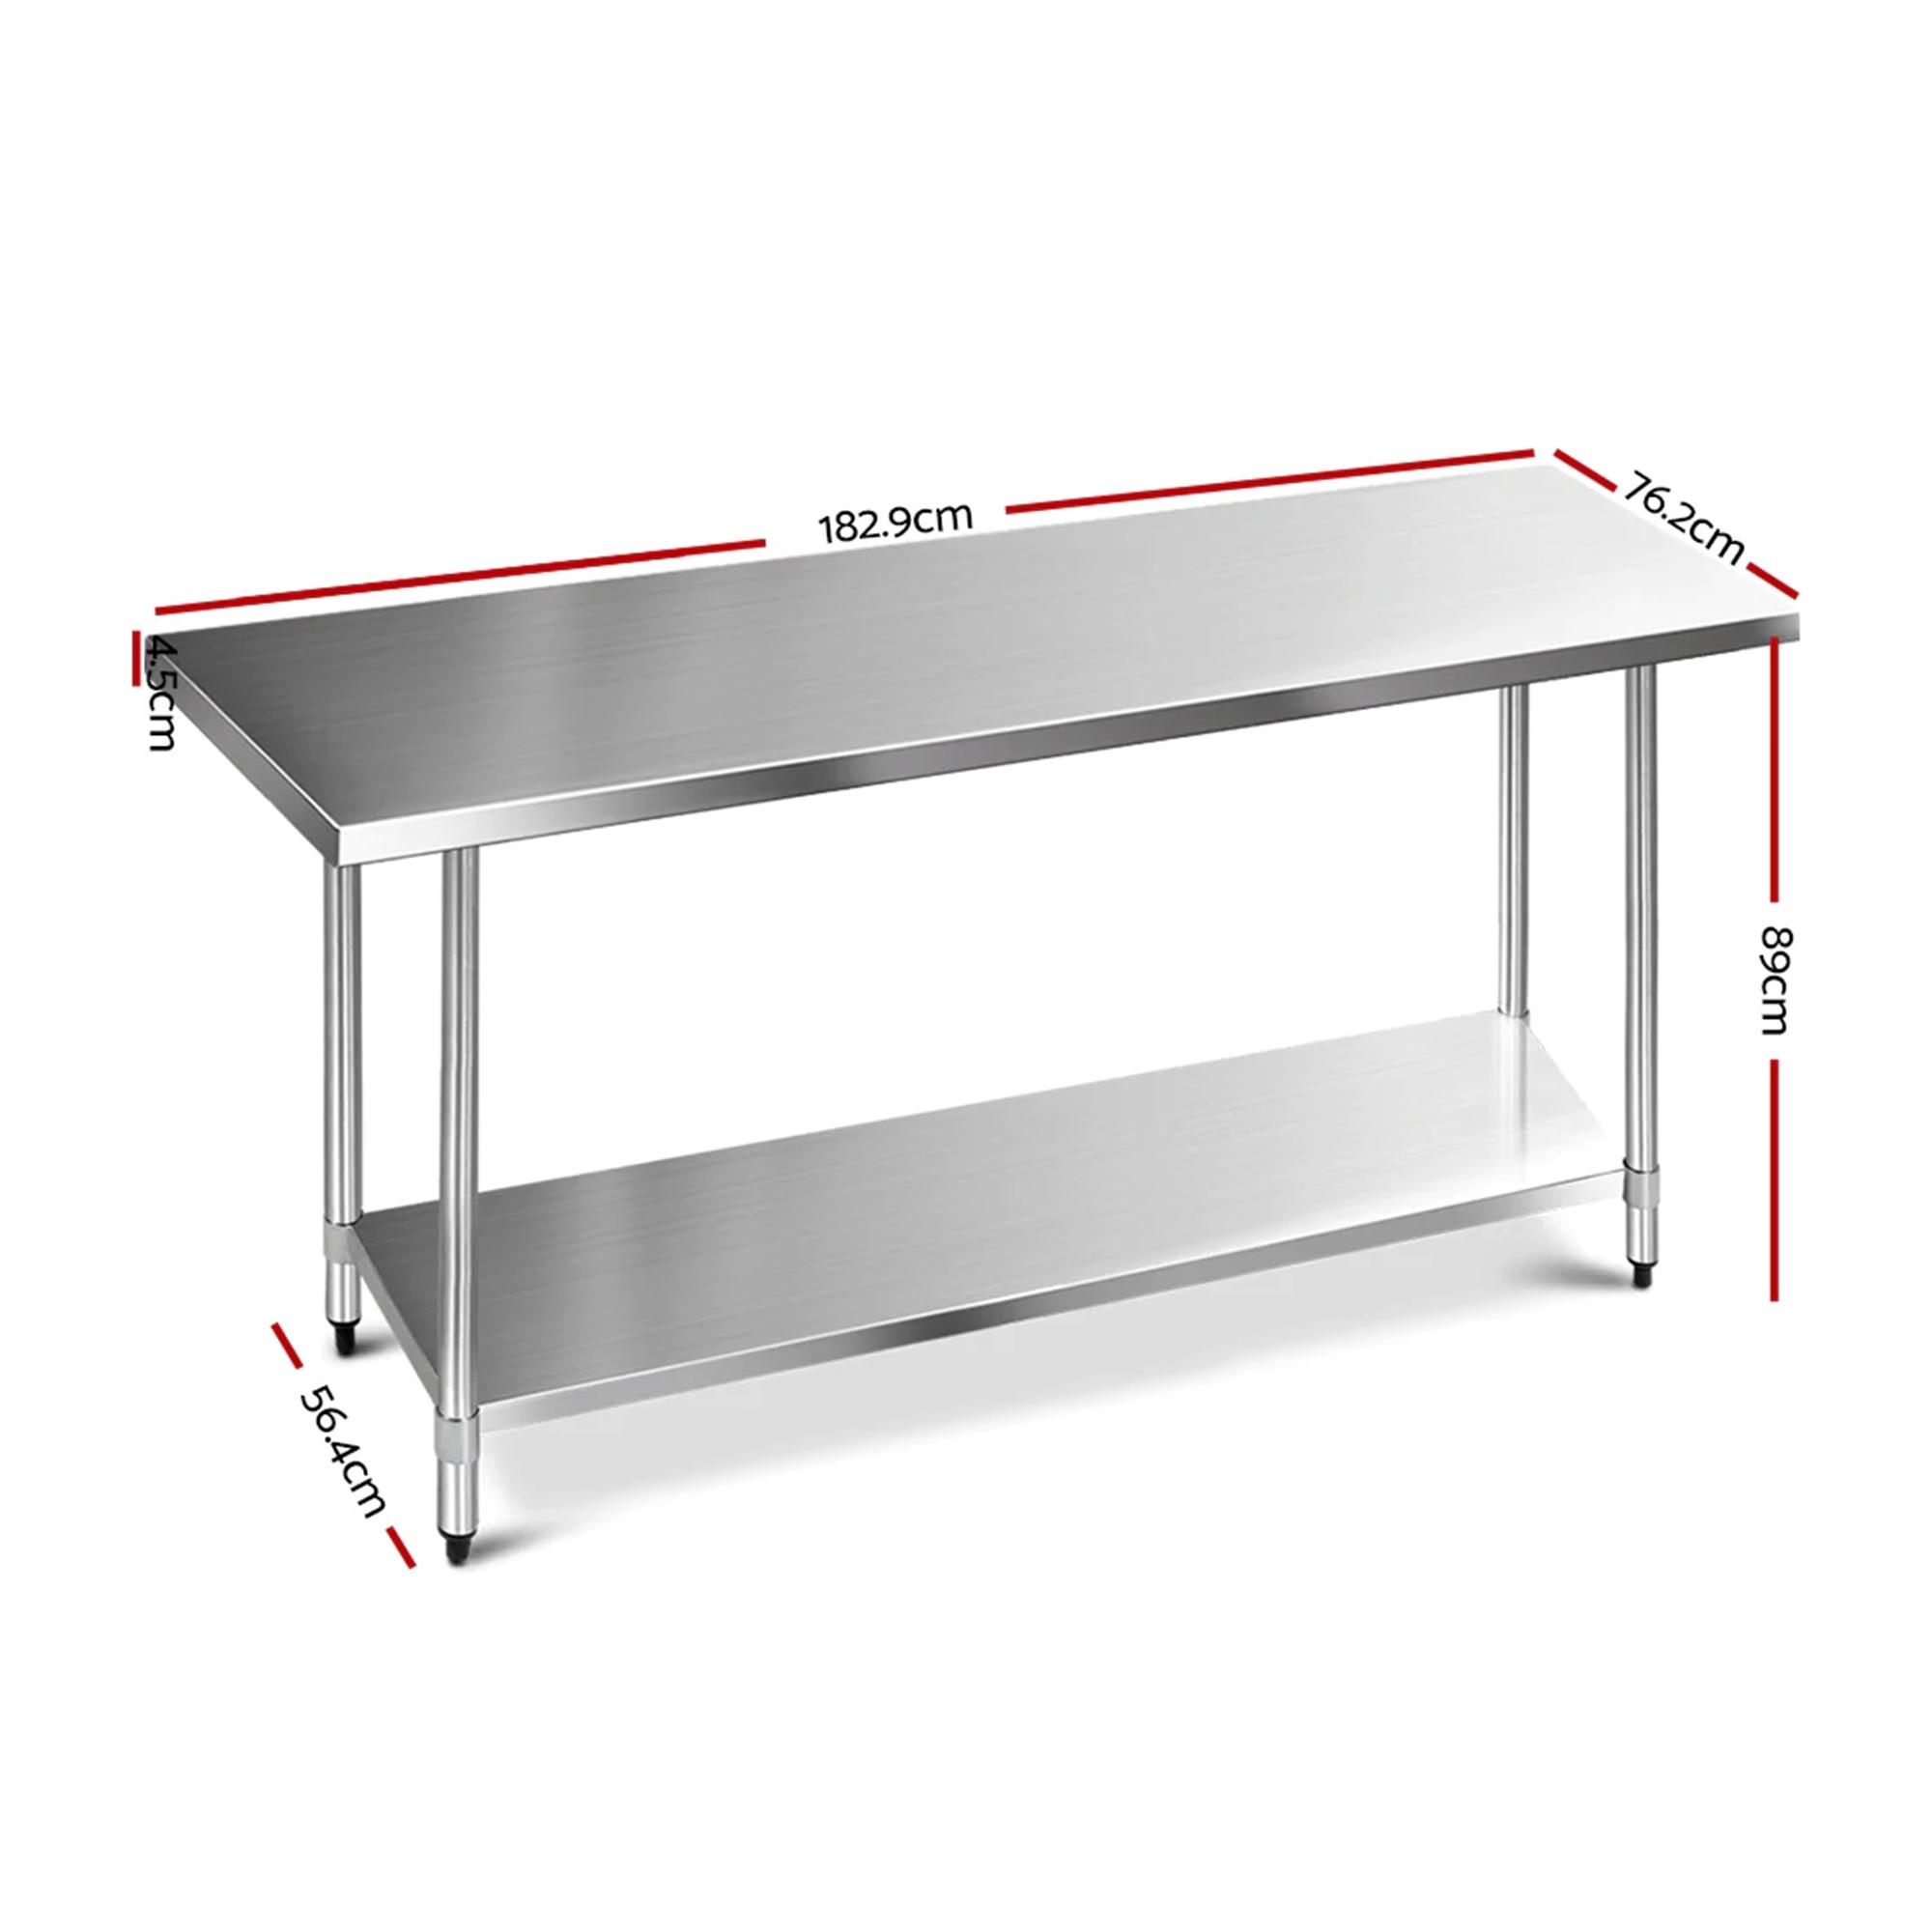 Cefito 430 Stainless Steel Kitchen Bench 182.9x76.2cm Image 3